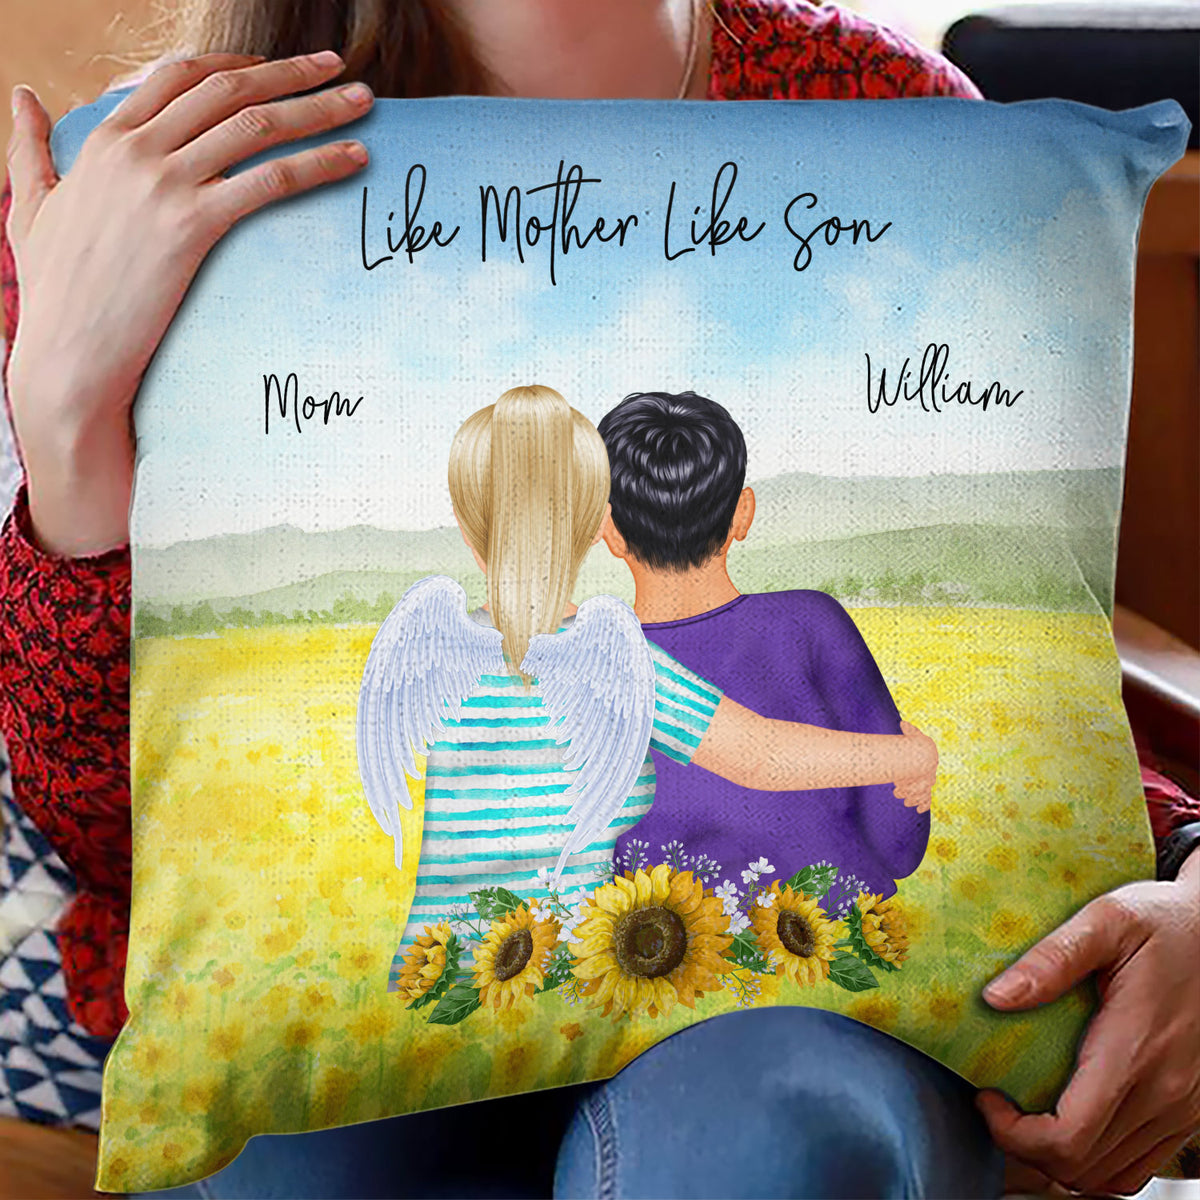 The Love Between Mother And Son Is Forever Photo Pillow